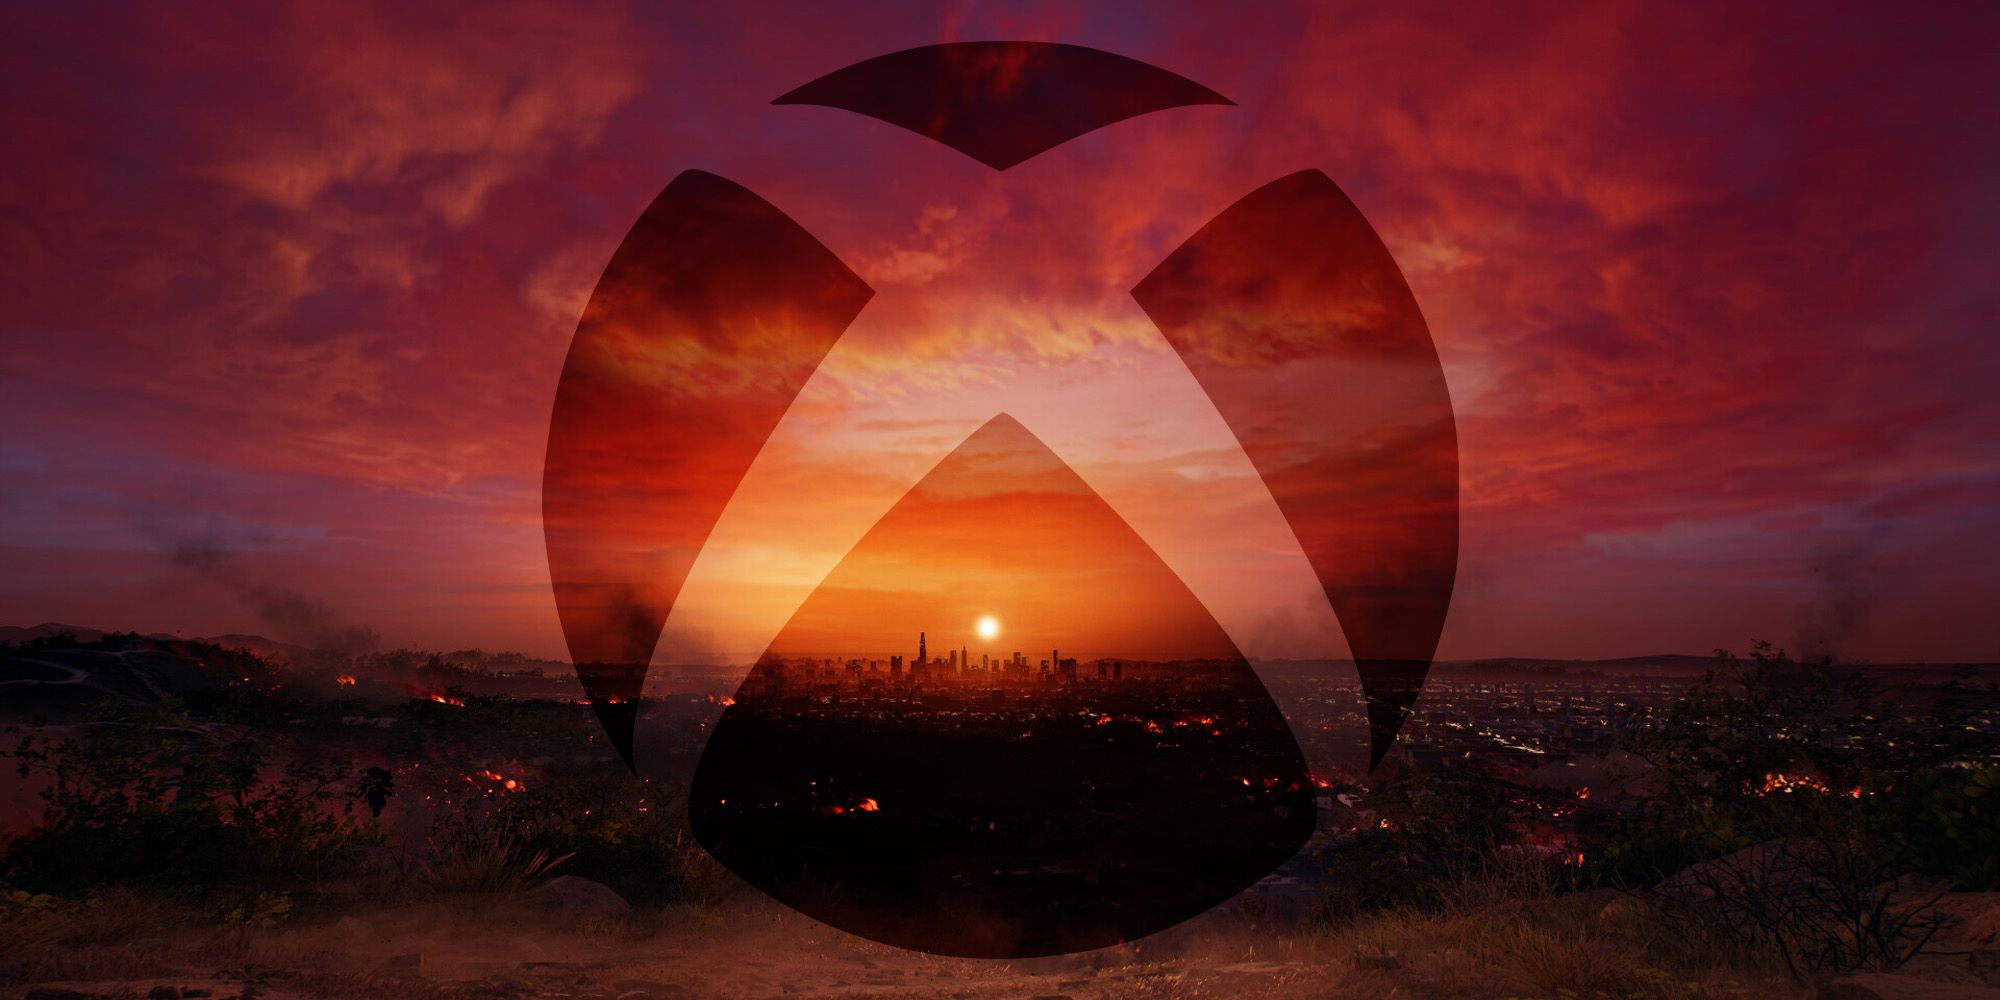 The Xbox logo superimposed over a Los Angeles sunset from Dead Island 2